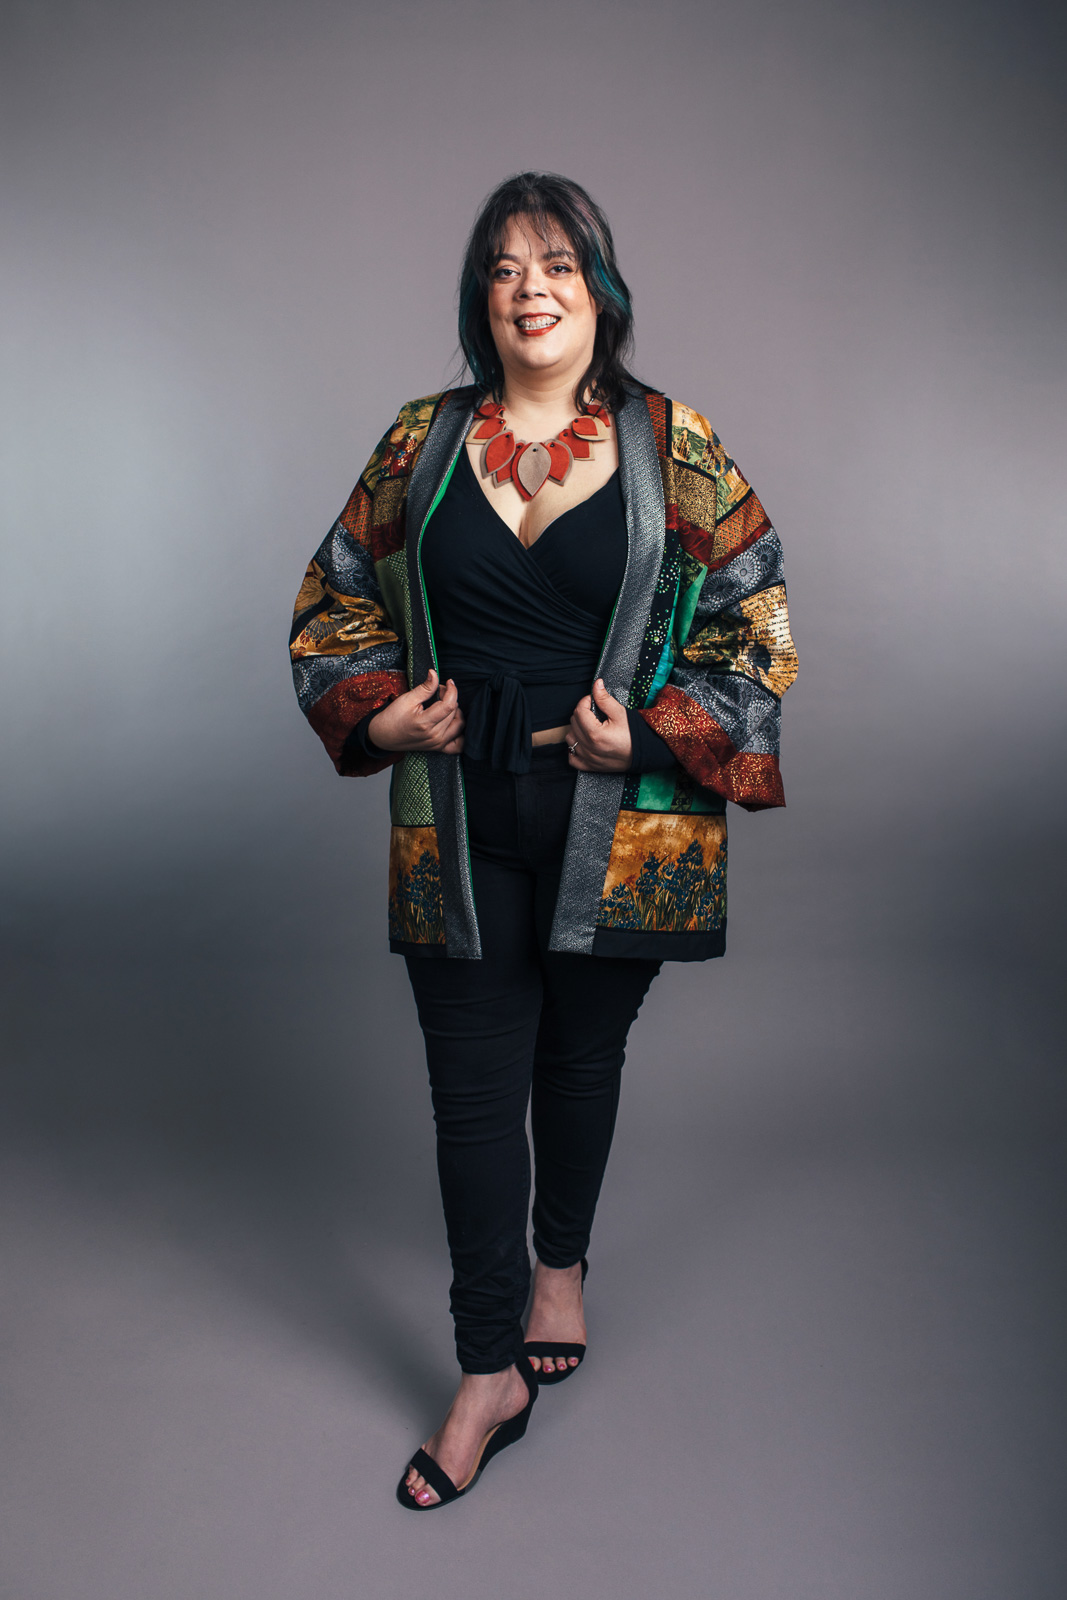 2023 Upcycled Fashion Show portrait by portrait artist, Kerry Struble, of Birch Blaze Studios located in Wakefield, NH. Modern kimonos designed and created with repurposed materials,